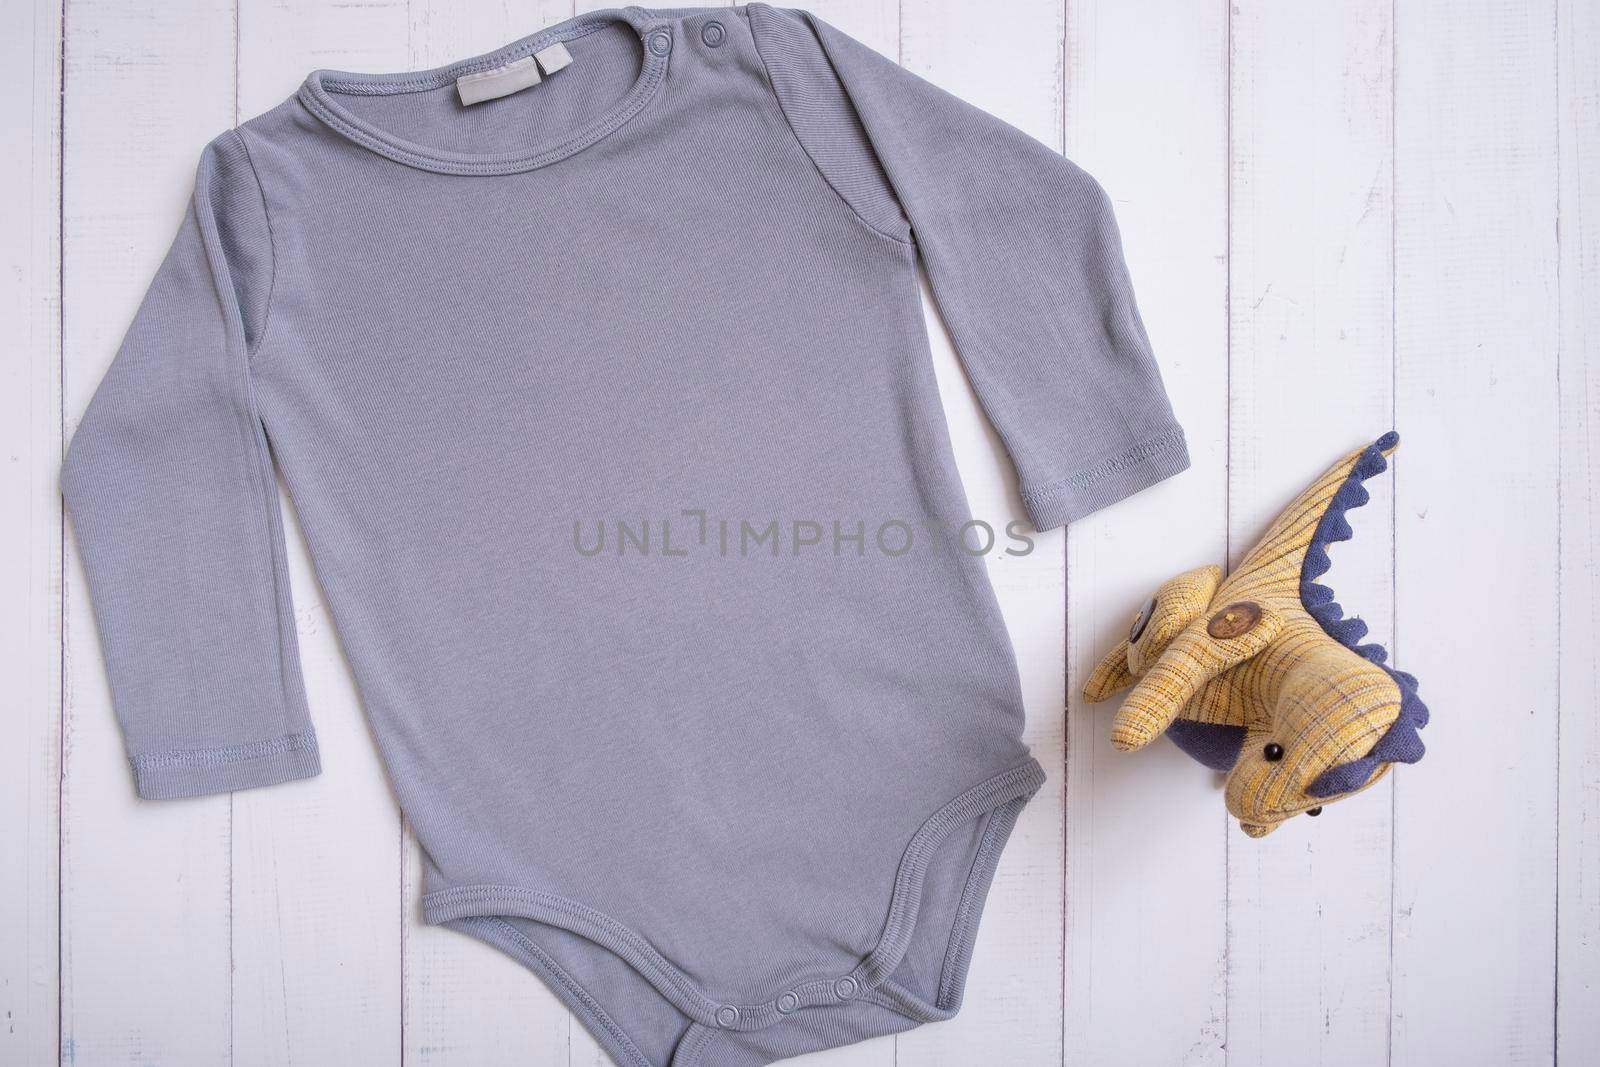 Grey baby bodysuit top view. Mock up for logo, text or design on wooden background. Flat lay with dinosaur by ssvimaliss